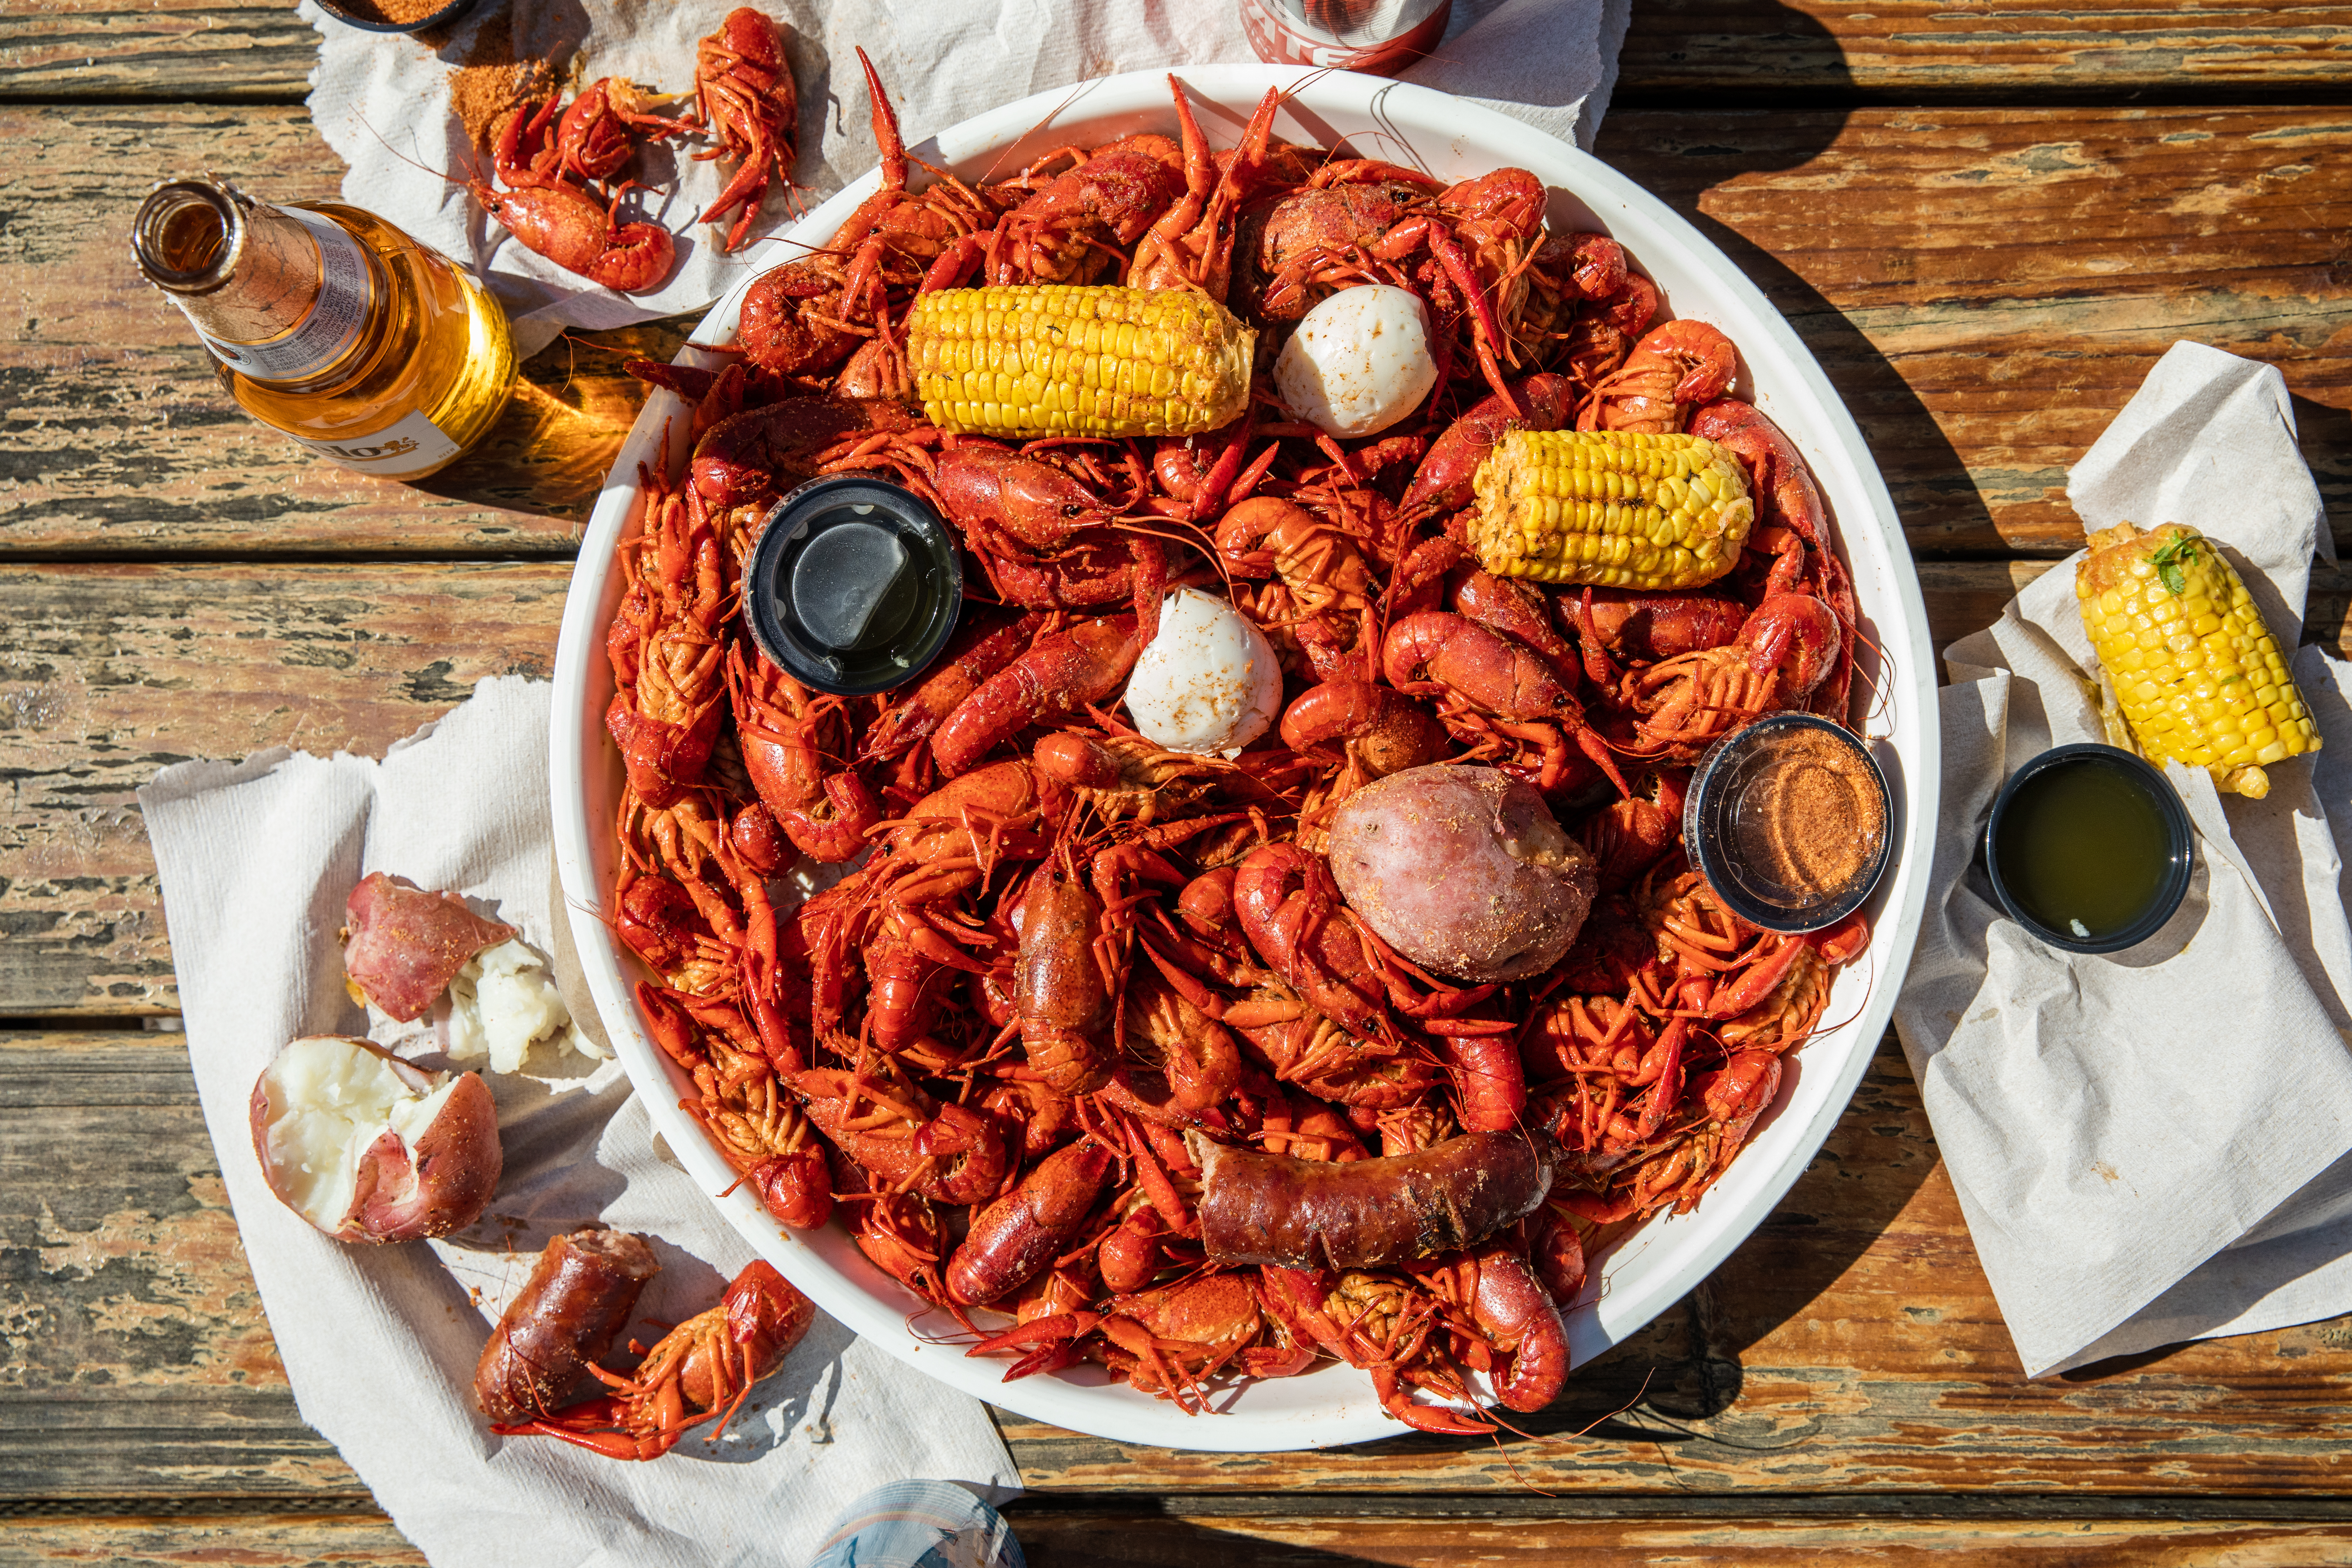 A metal tray of crawfish, with potatoes, hard-boiled eggs, corn on the cob, and bottles of beer.